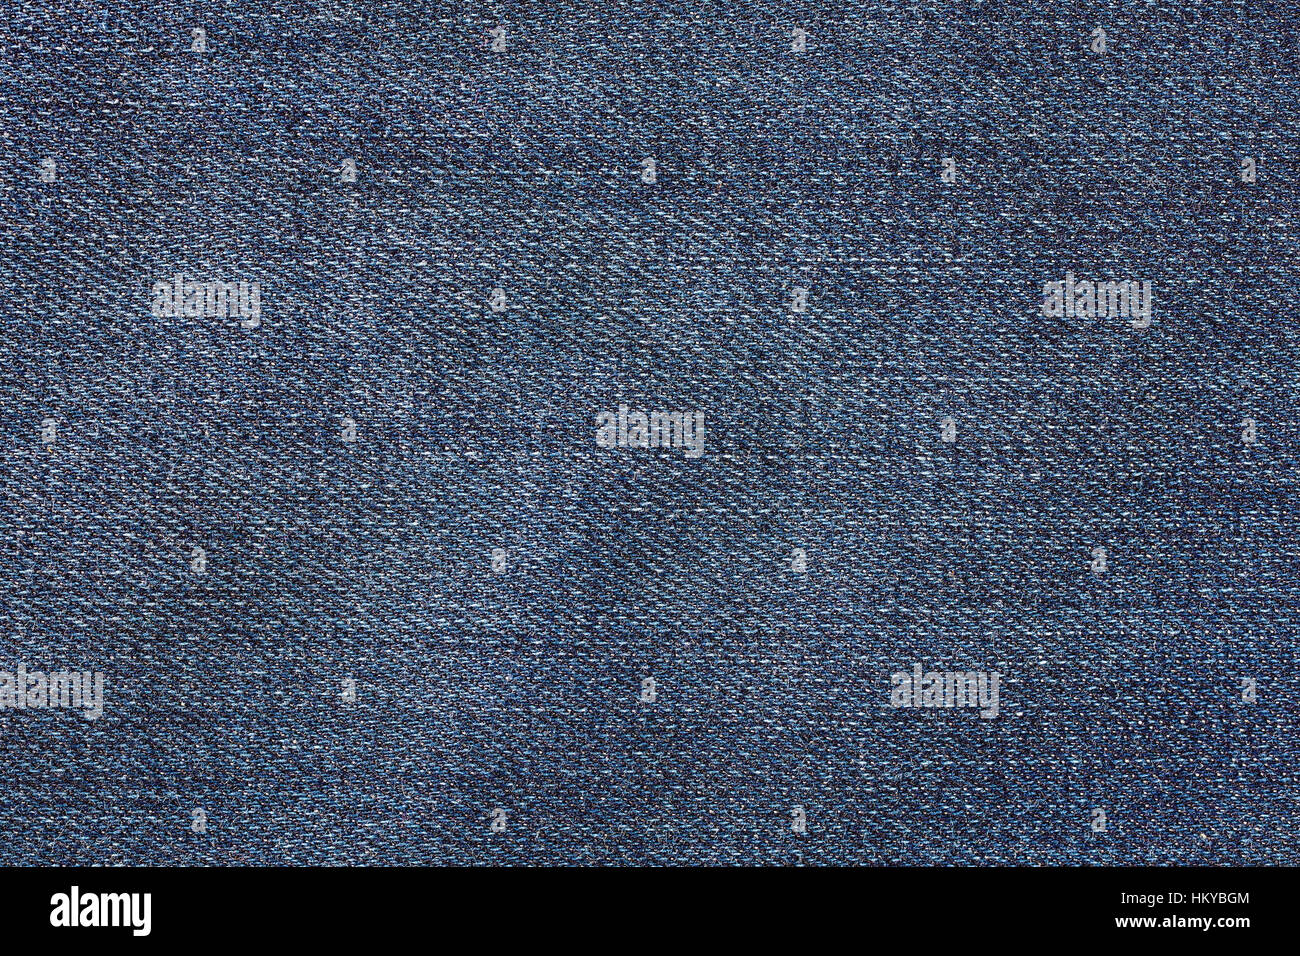 Close up blue jeans fabric background or texture. Stock Photo